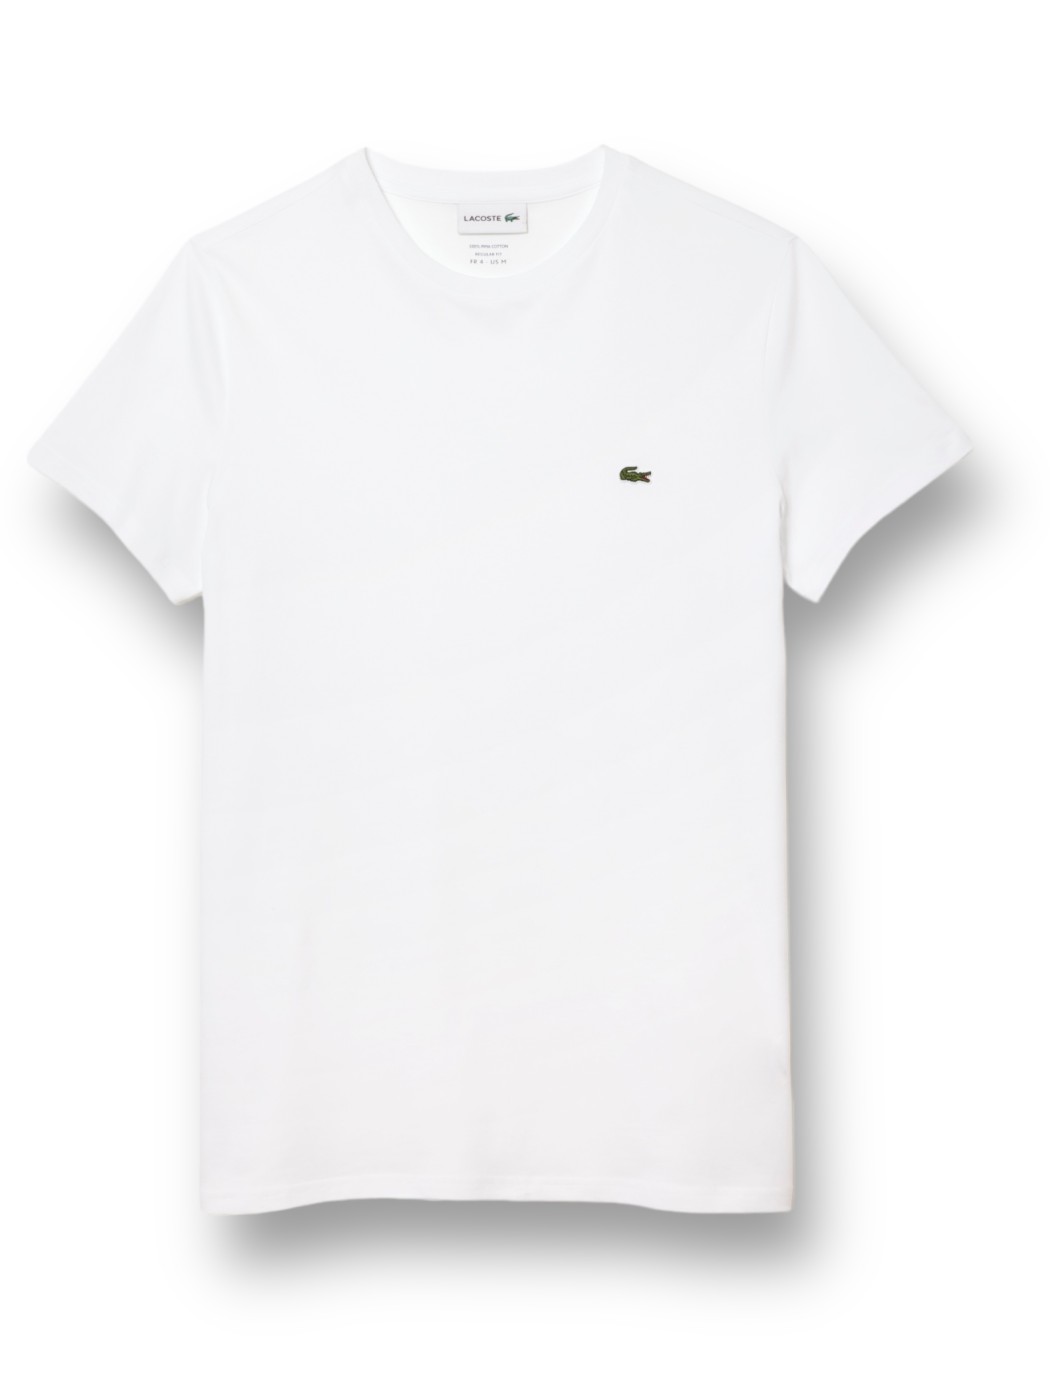 T-SHIRT LACOSTE TH6709 001